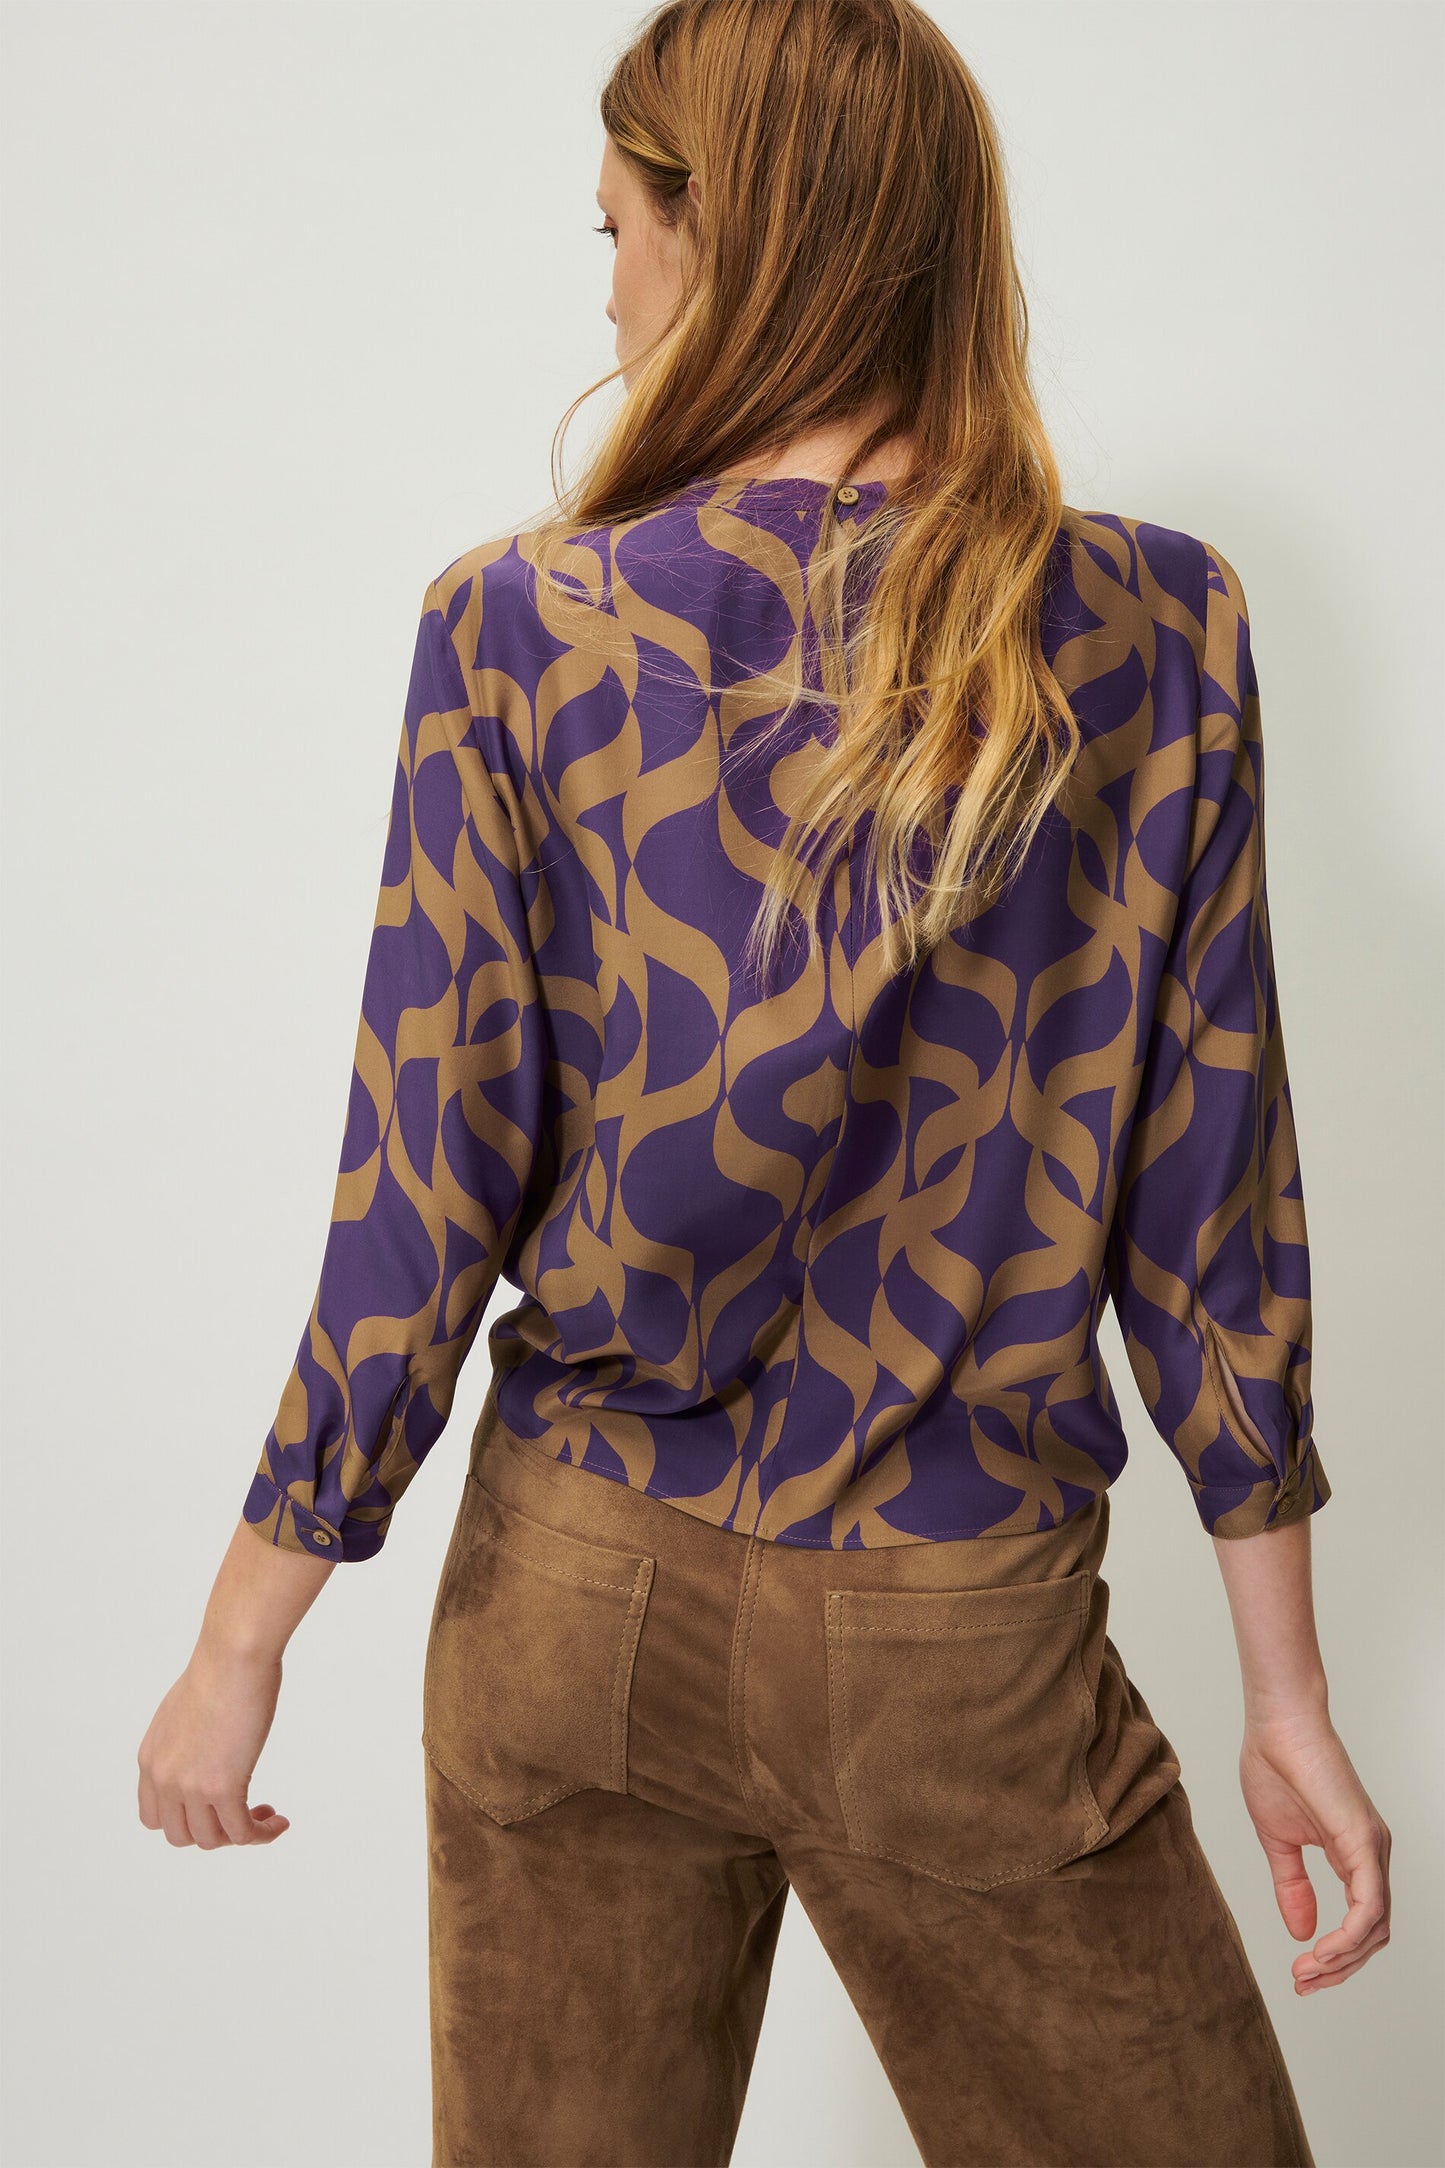 Blouse with graphic inspired print